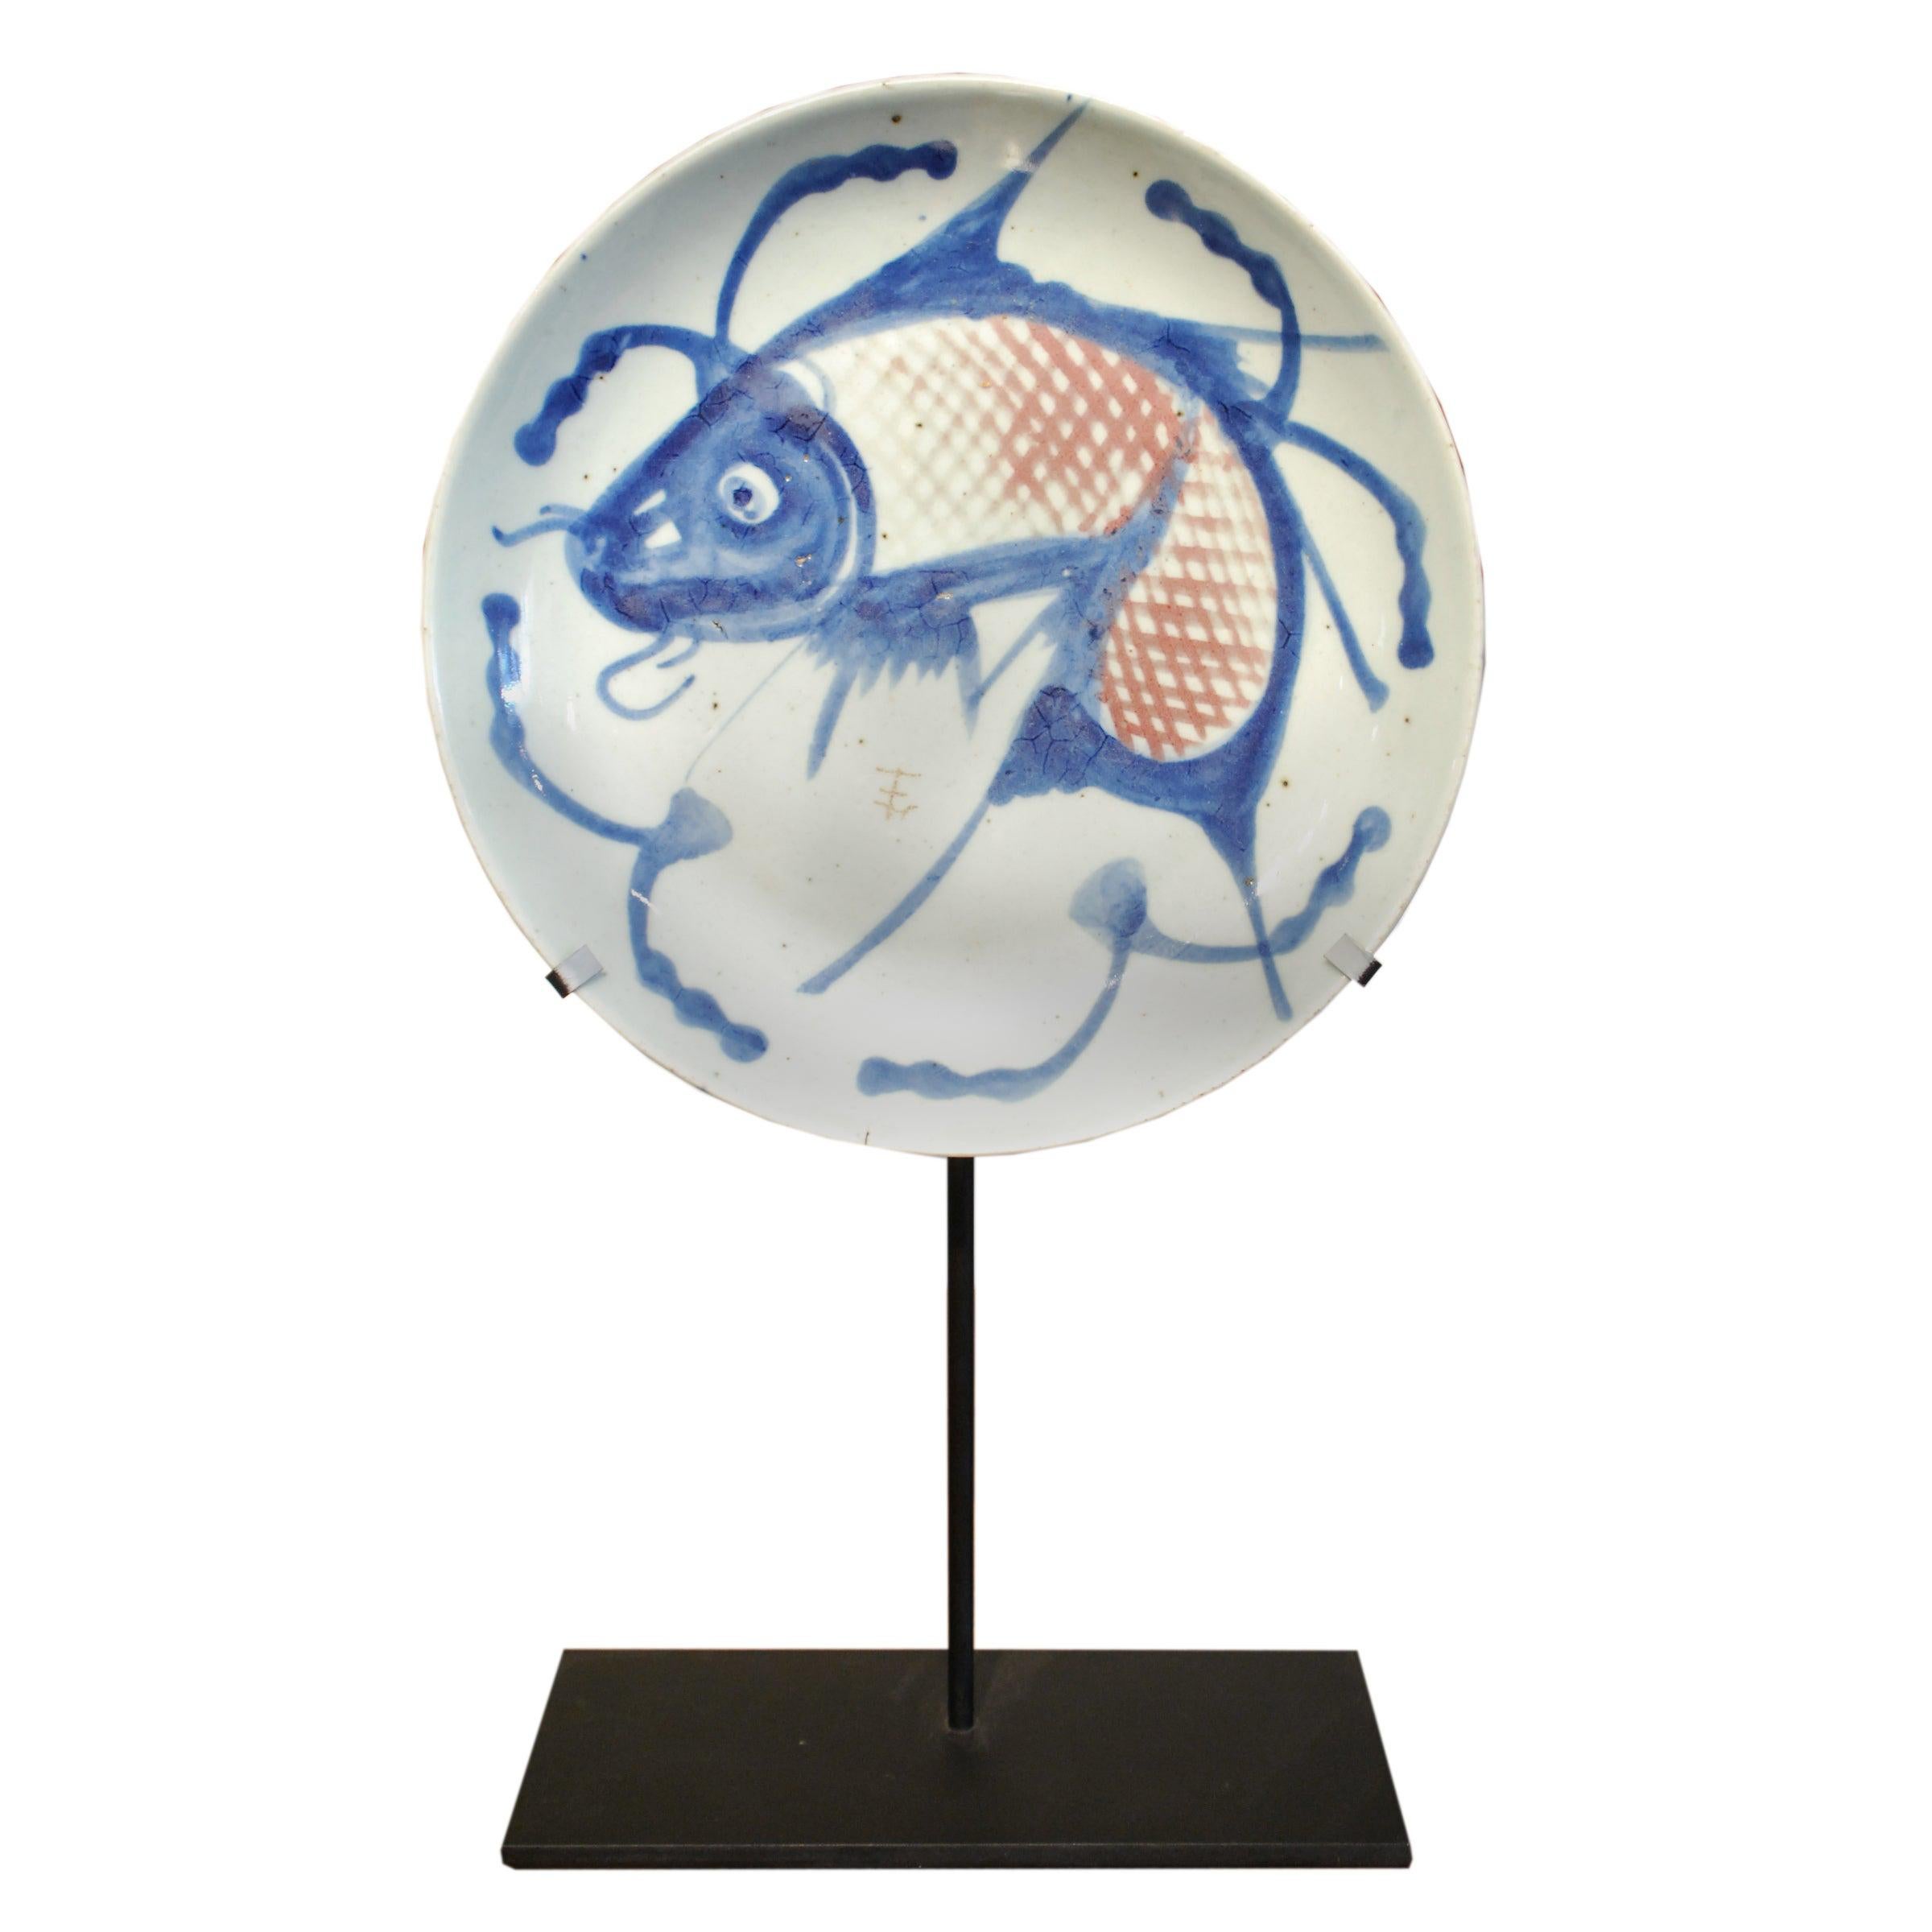 Chinese Blue and White Fish Plate, c. 1850